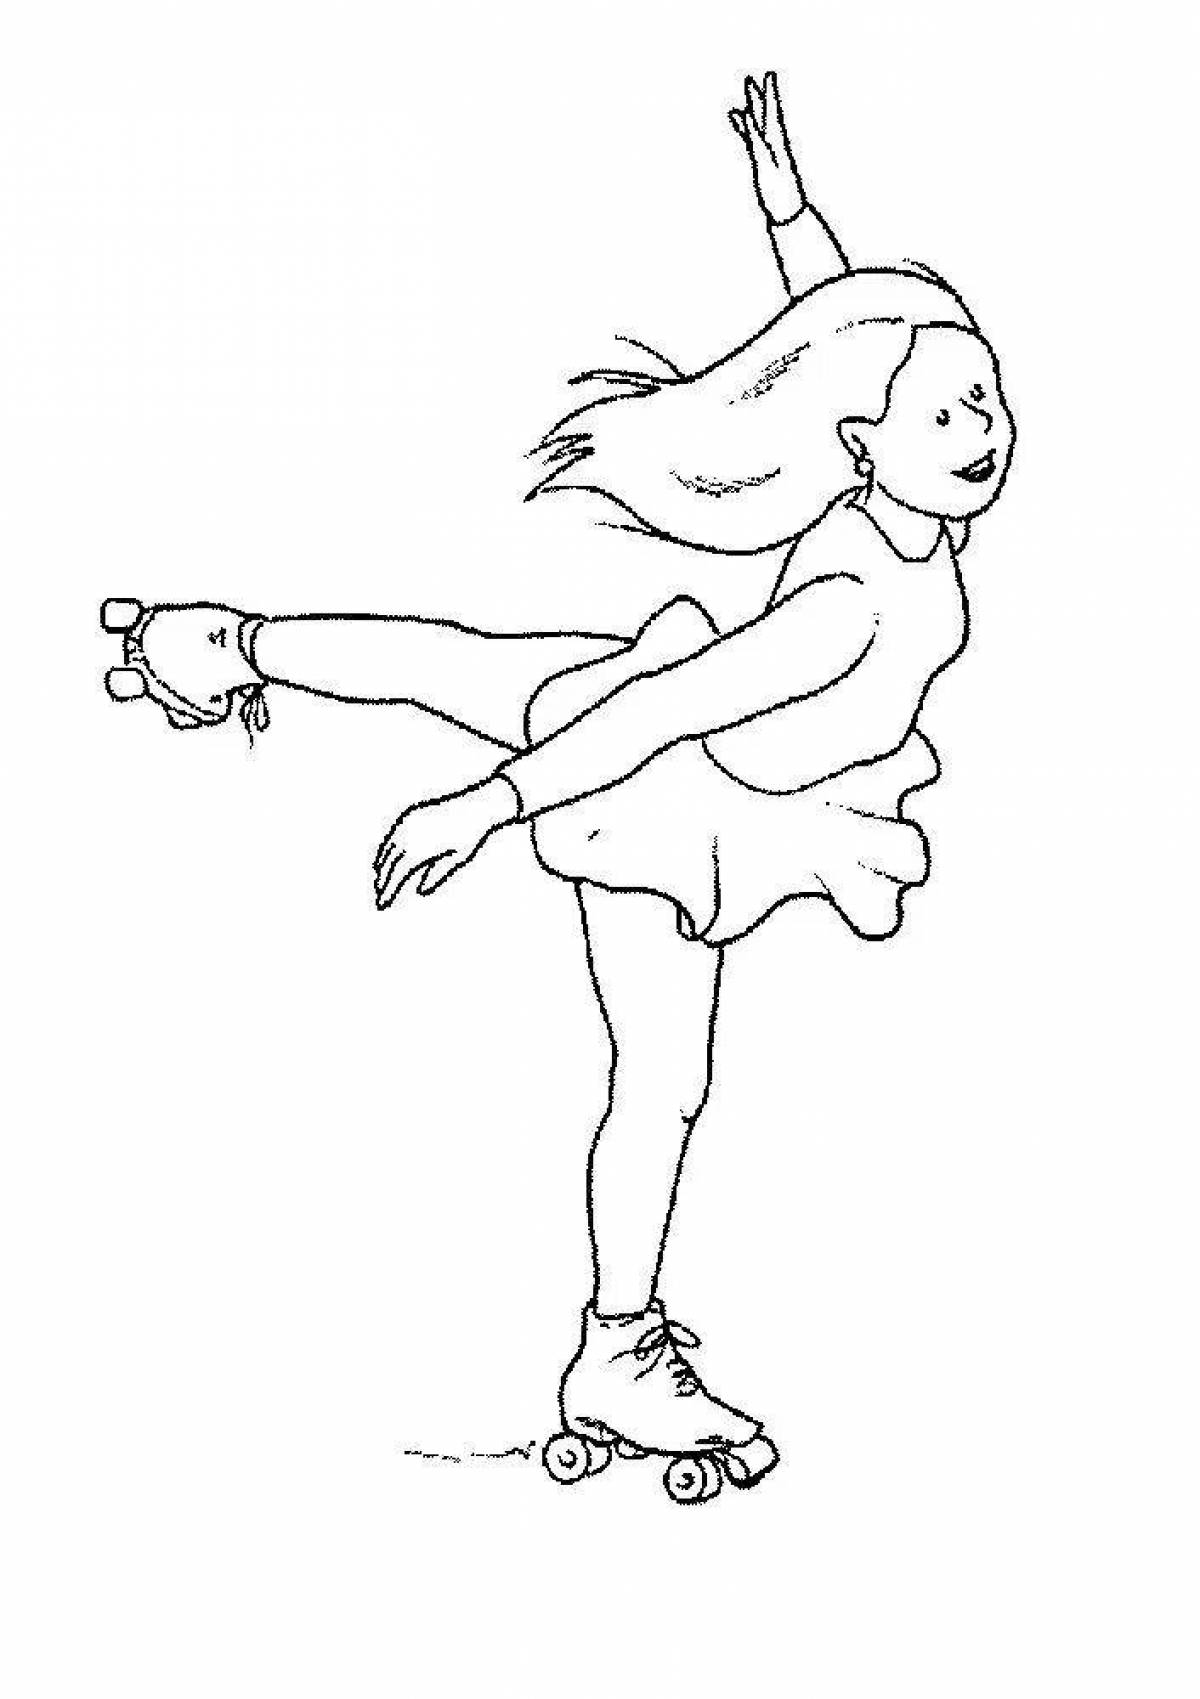 Cute figure skater coloring book for kids